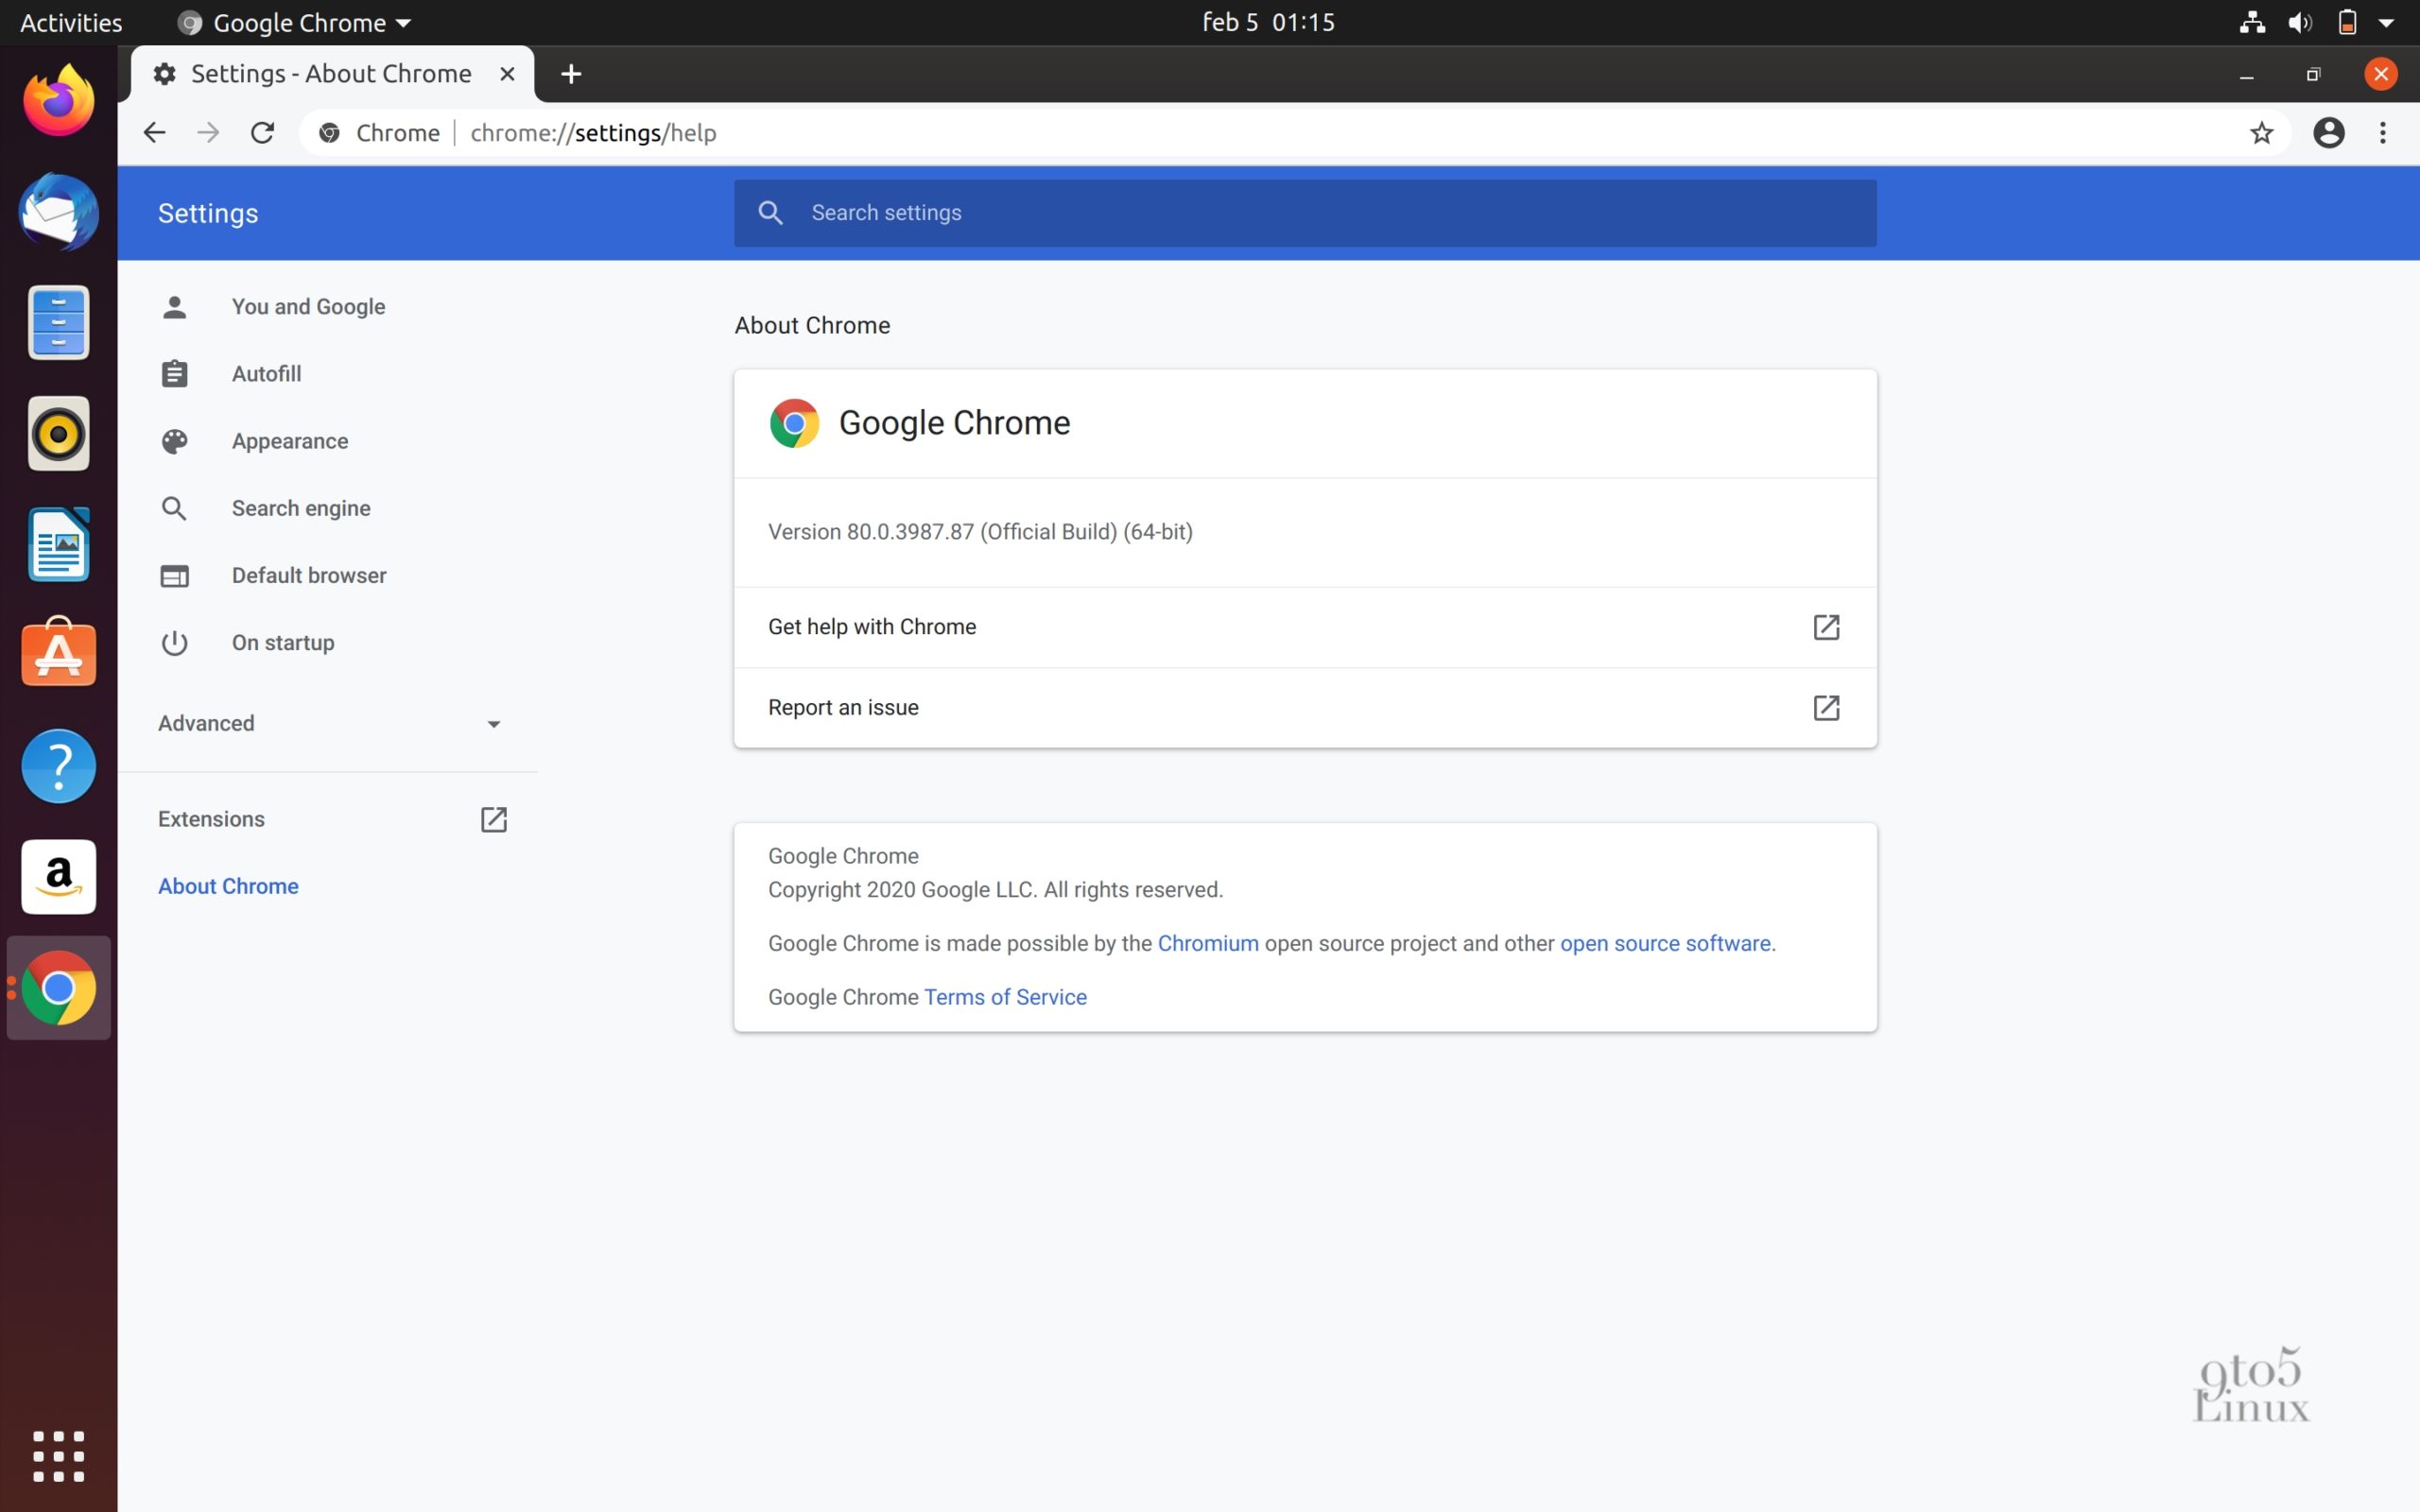 Chrome 80 Released with SameSite Cookie Enforcement, 56 Security Fixes